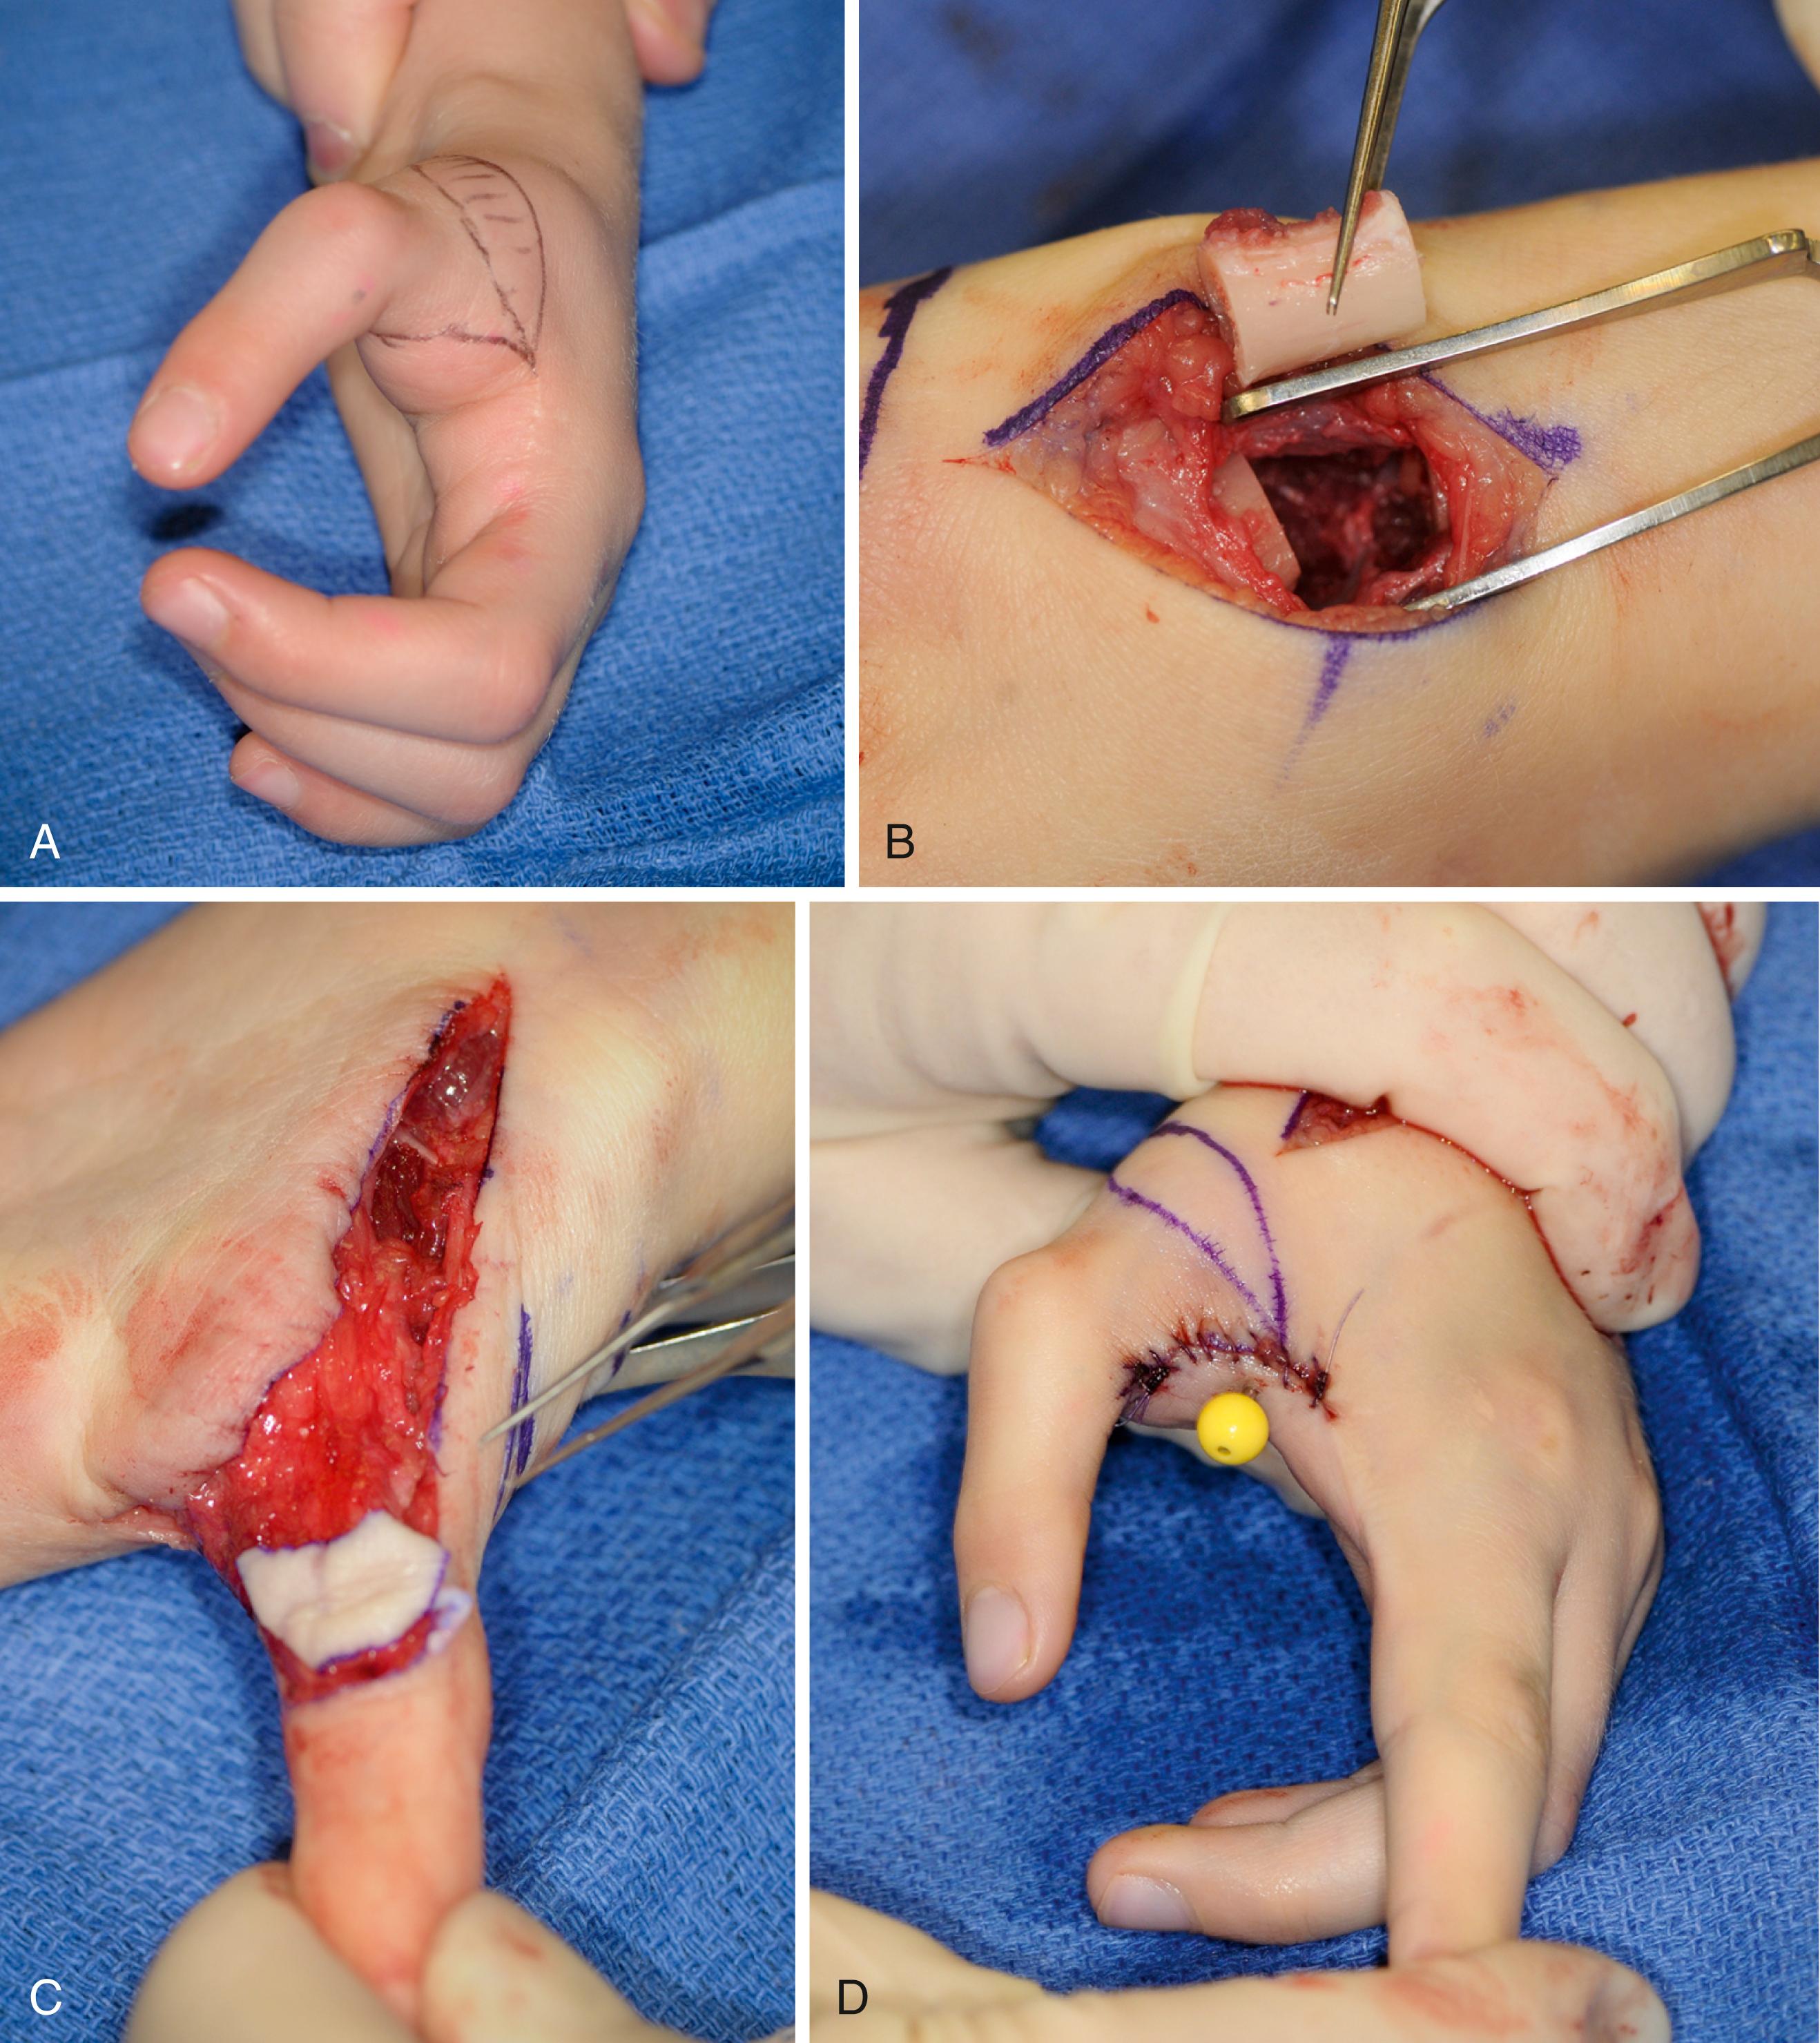 Fig. 37.40, A 6-year-old with a long thumb attributed to ongoing growth at the metacarpal physis. A, Clinical appearance of elongated thumb. B, Bony resection and epiphysiodesis. C, Skin reduction. D, Final appearance.